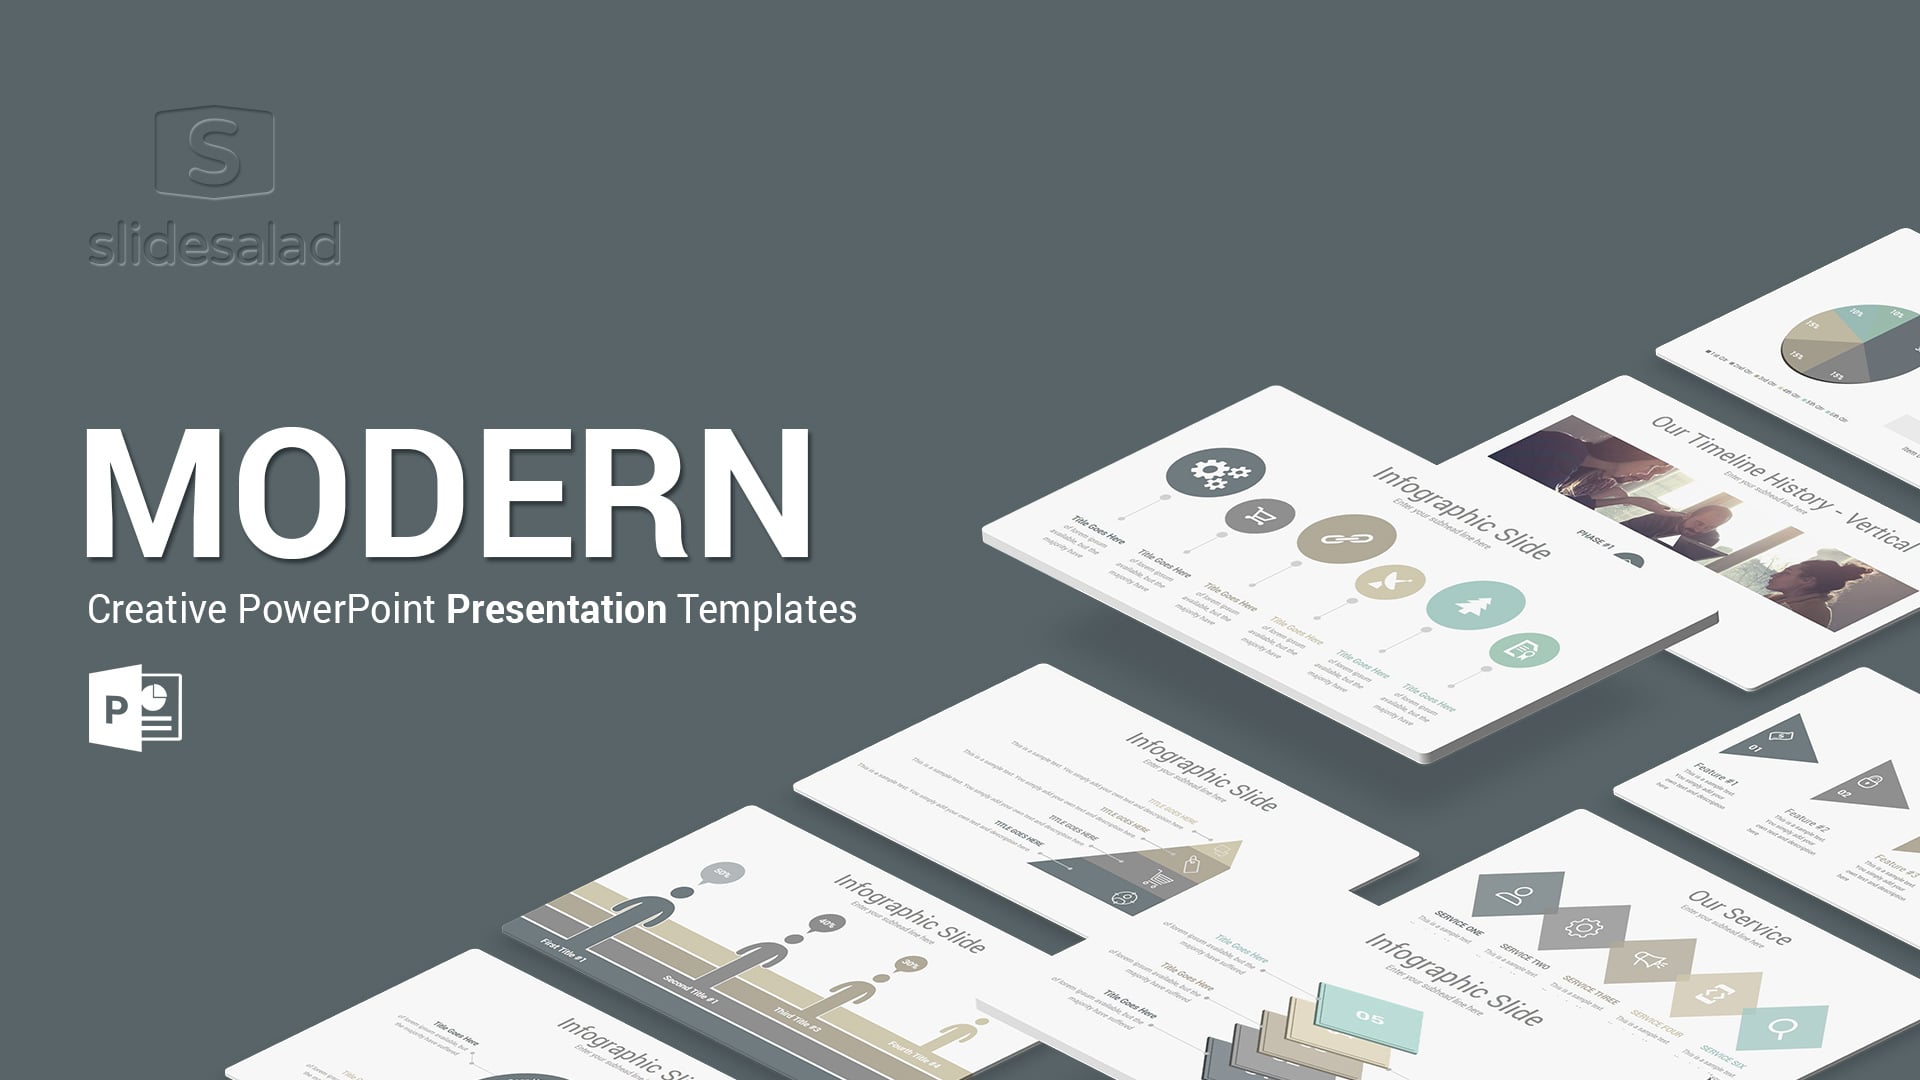 40 Cool Powerpoint Templates For Great Presentations For 2021 Slidesalad